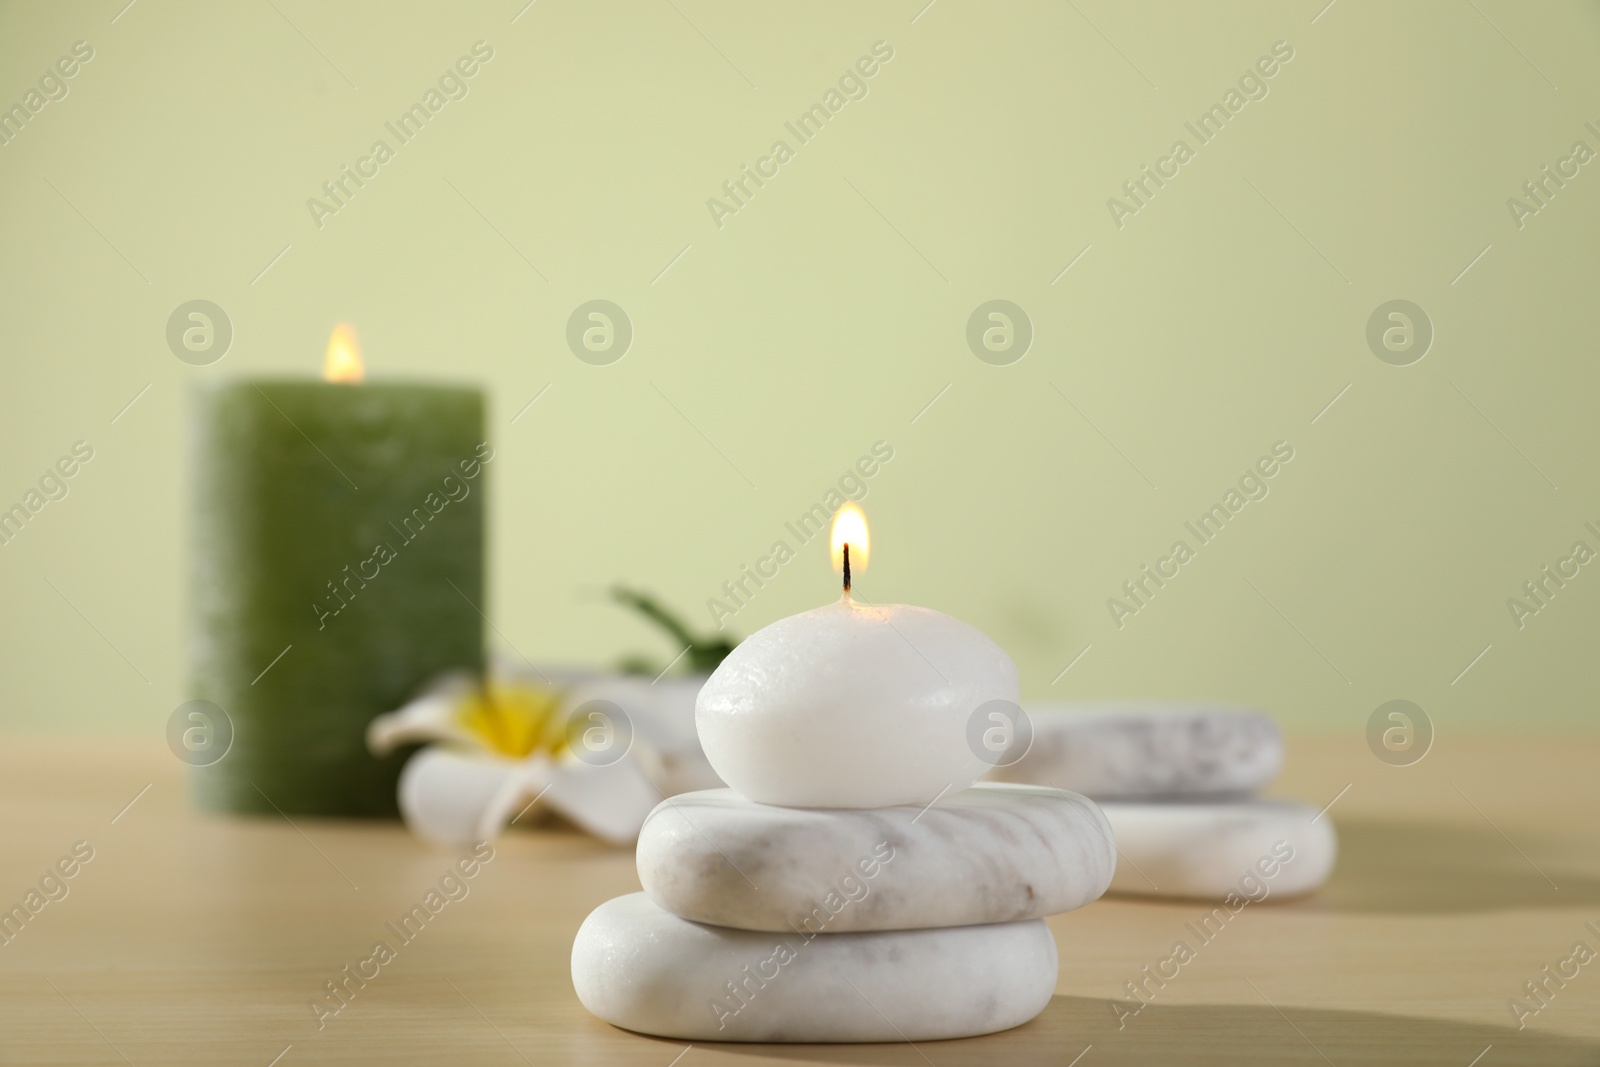 Photo of Spa stones and burning candles on wooden table against light green background